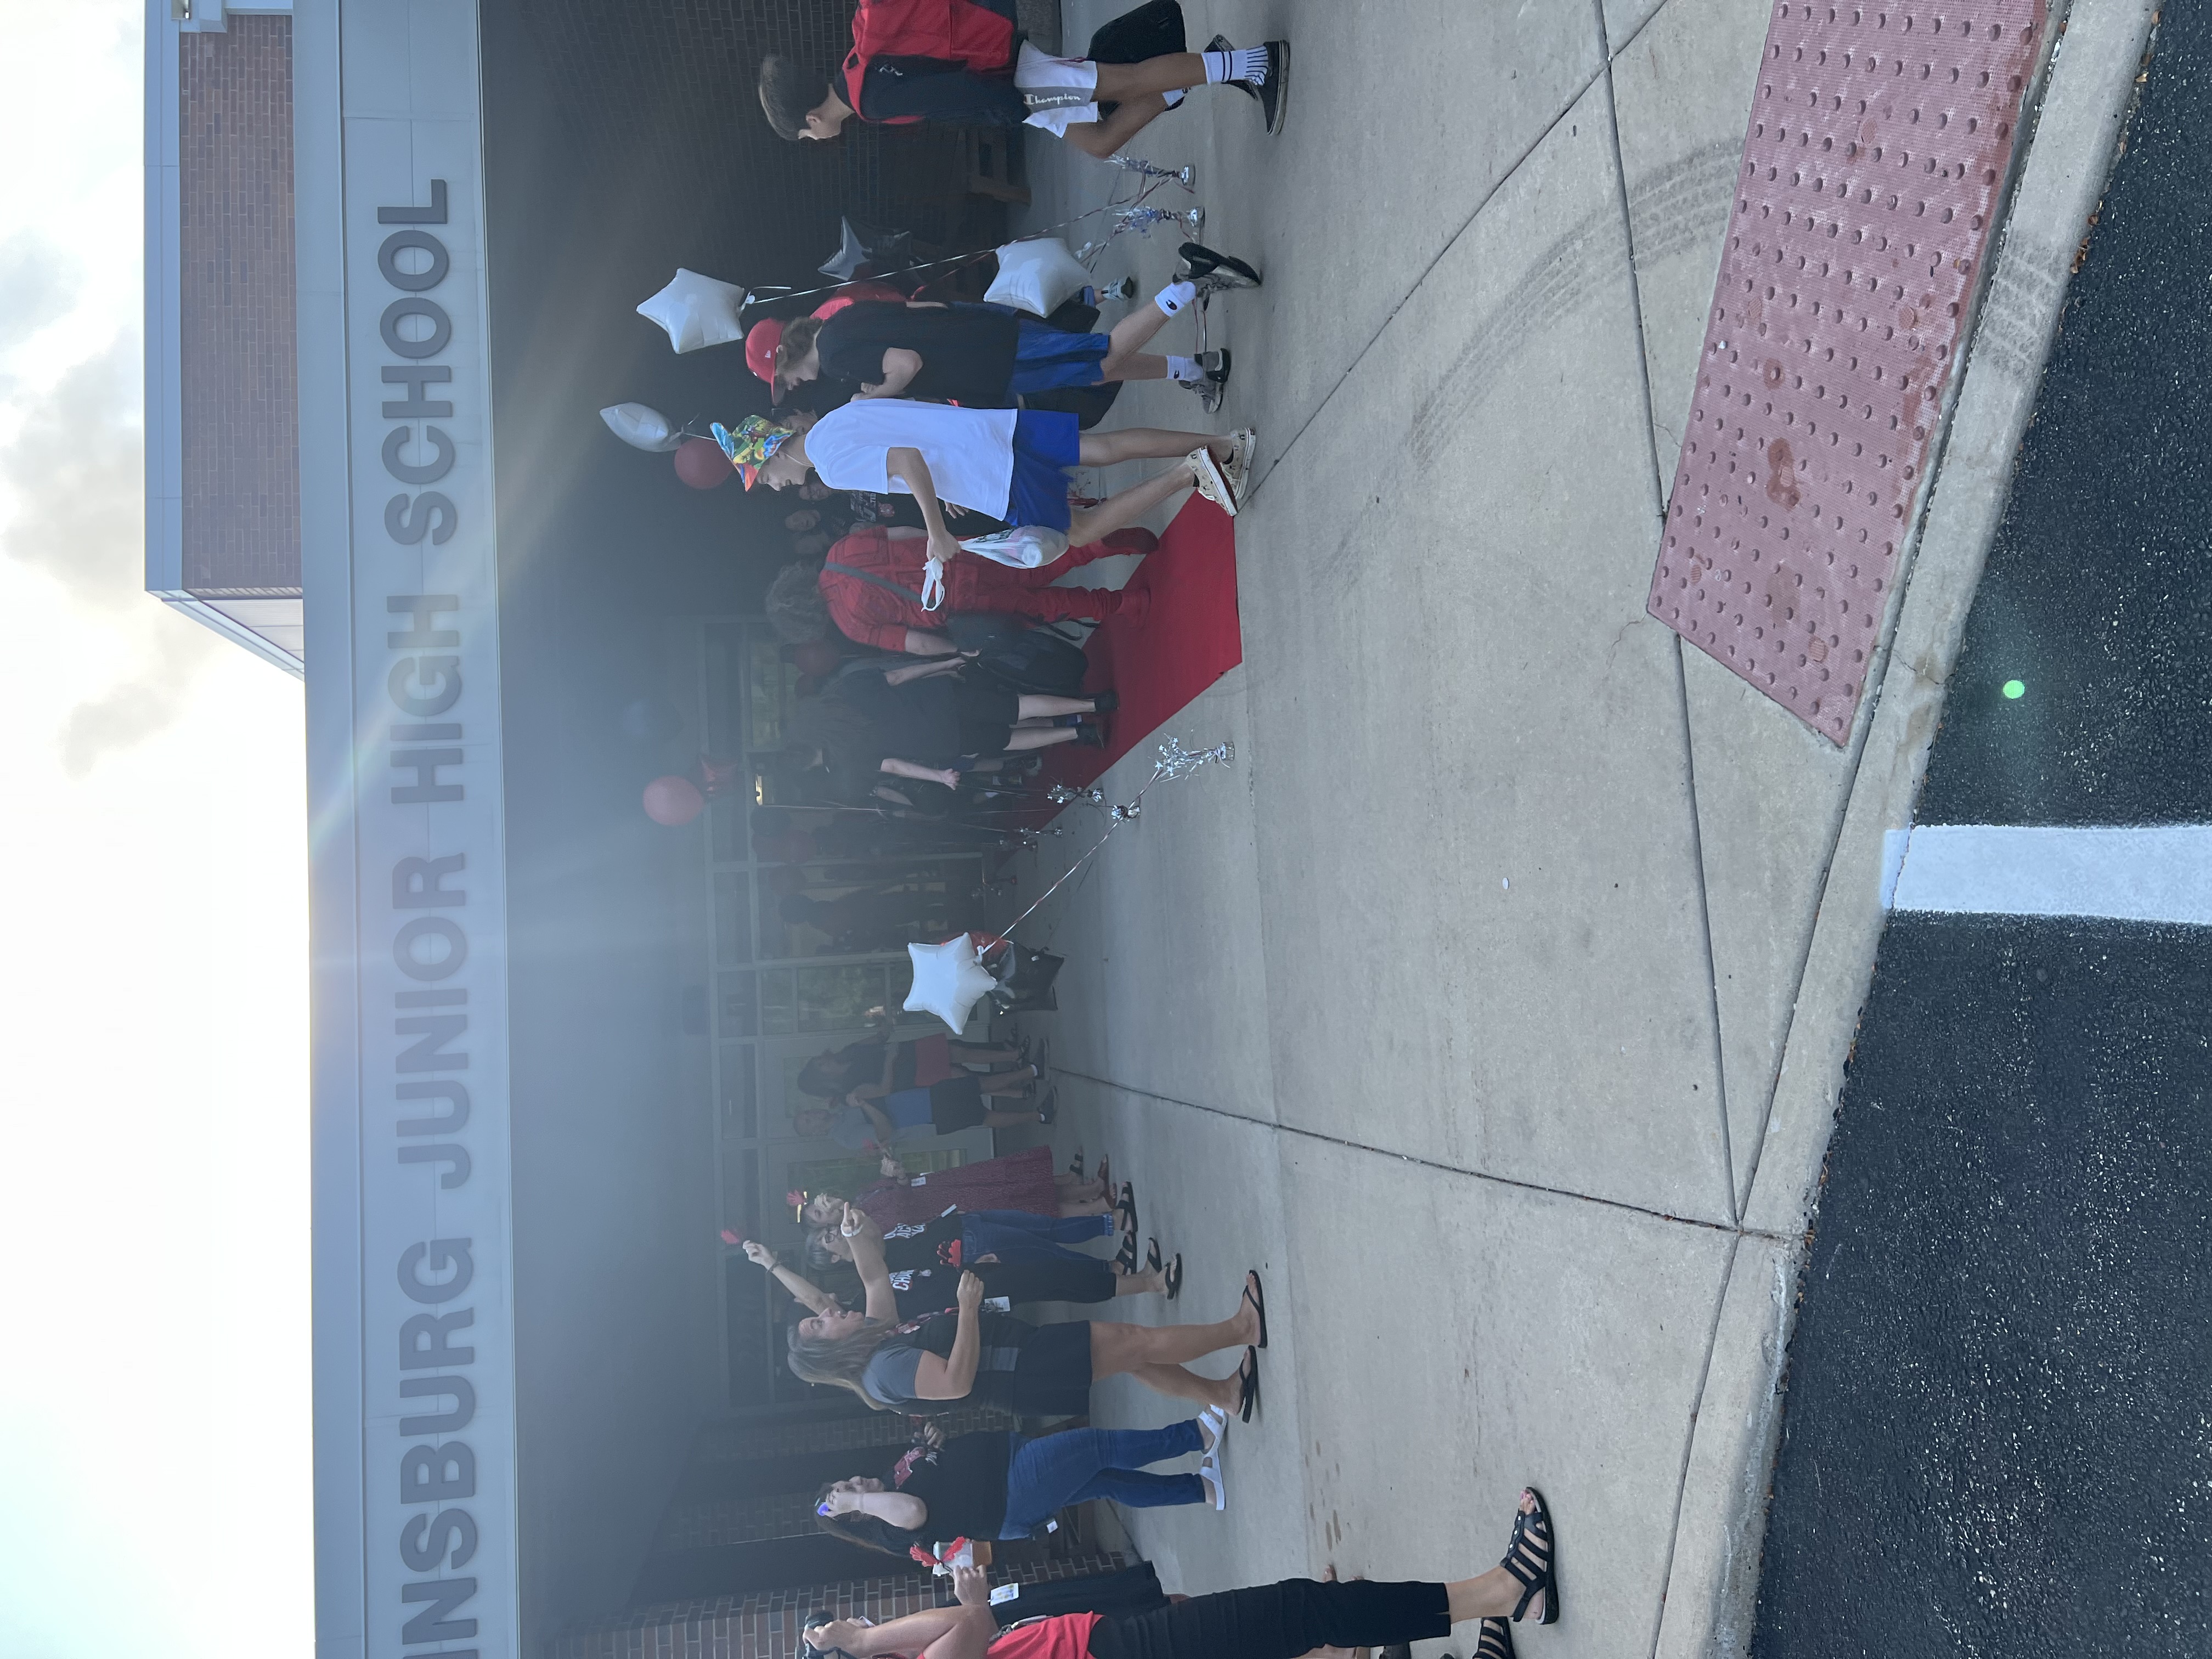 JJHS staff welcomes students on the first day of school.